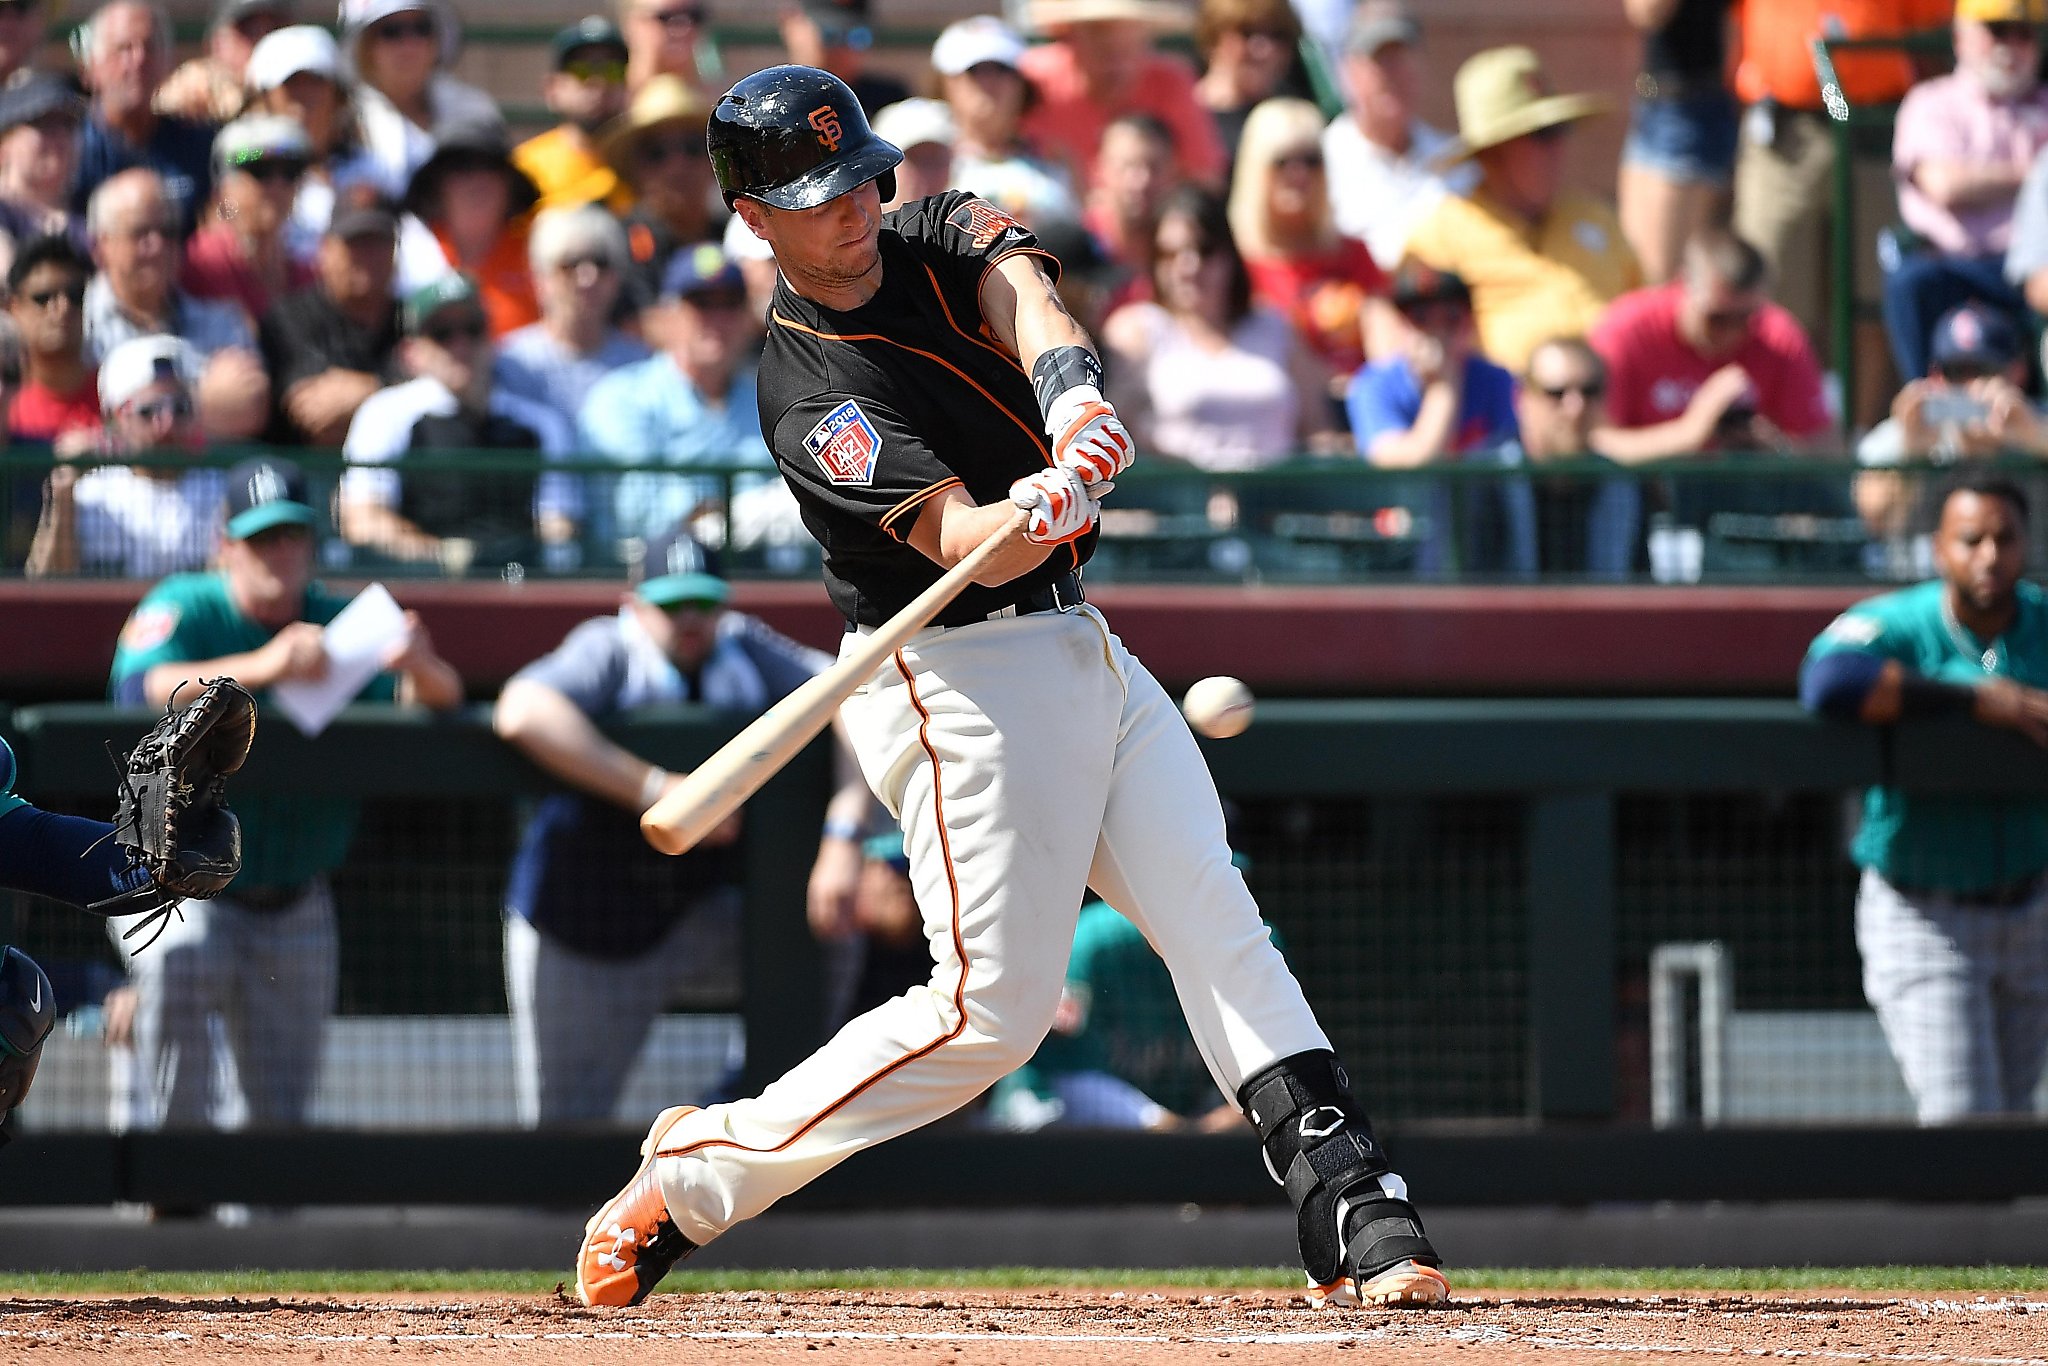 Giants’ Buster Posey has three hits in return - SFGate2048 x 1366